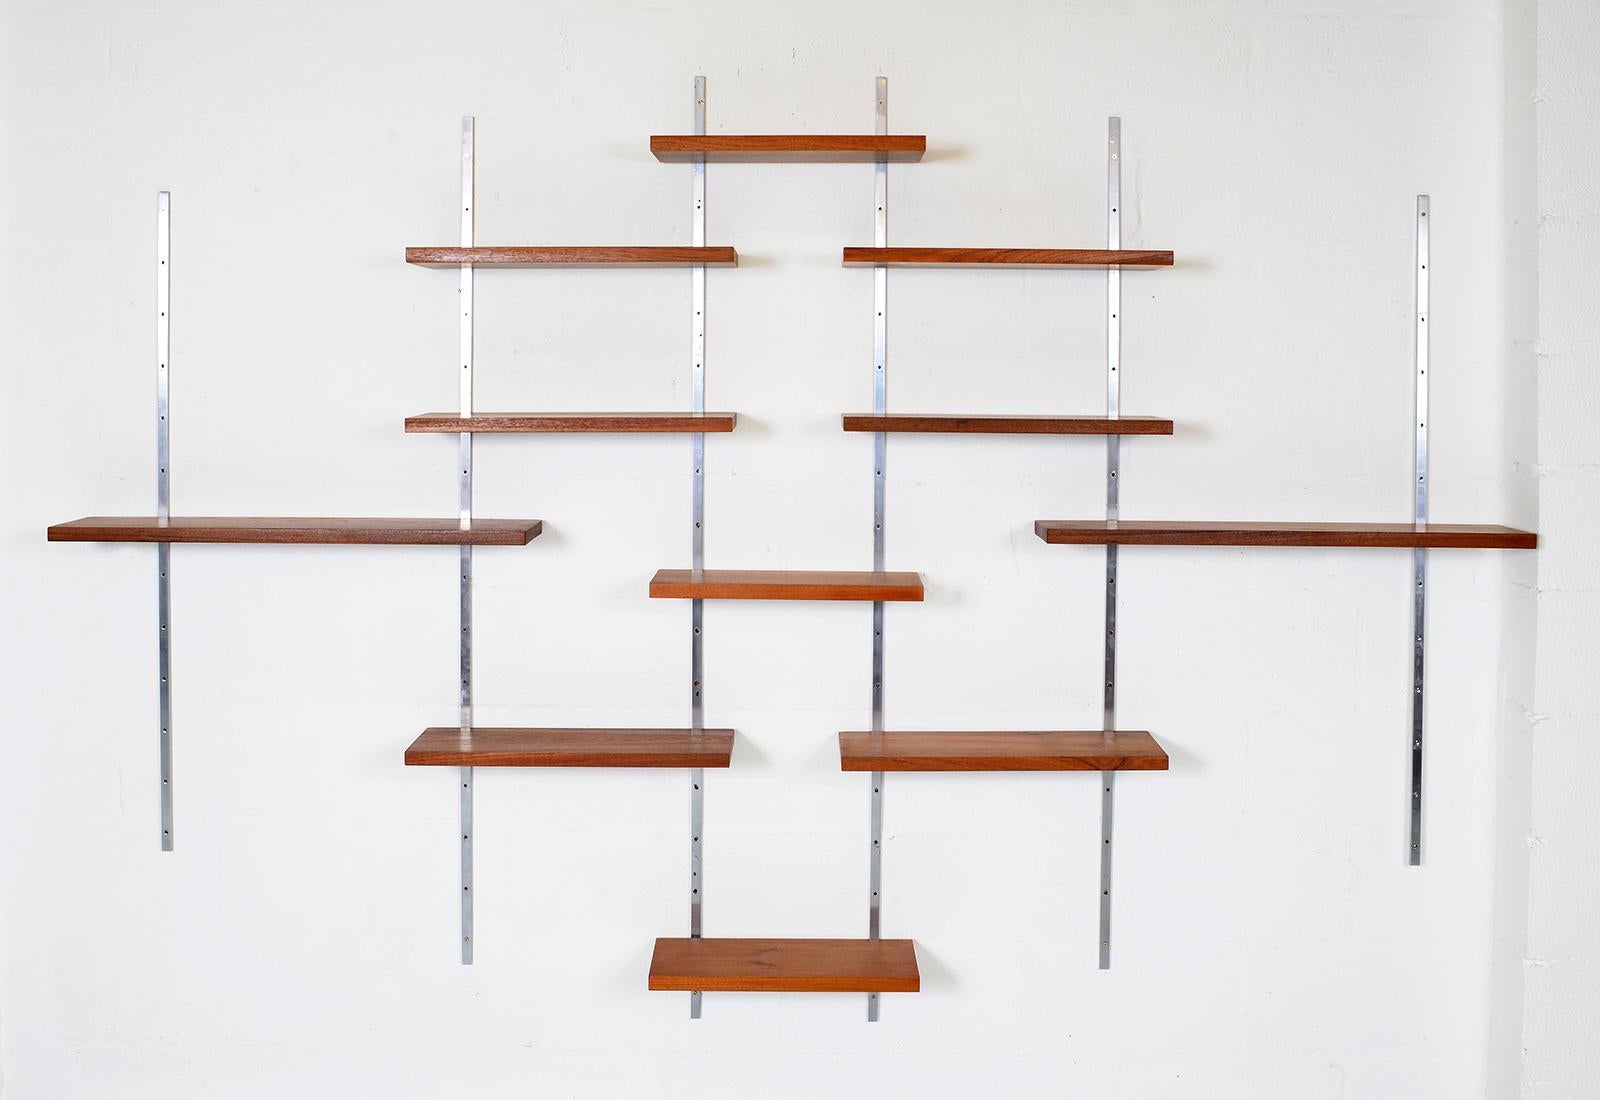 A wonderfully simple modernist design - this highly unusual 1960s modular shelving system looks like a piece of art! With chrome steel uprights and substantial solid teak shelving in three different sizes. Sourced from a single storey Modernist